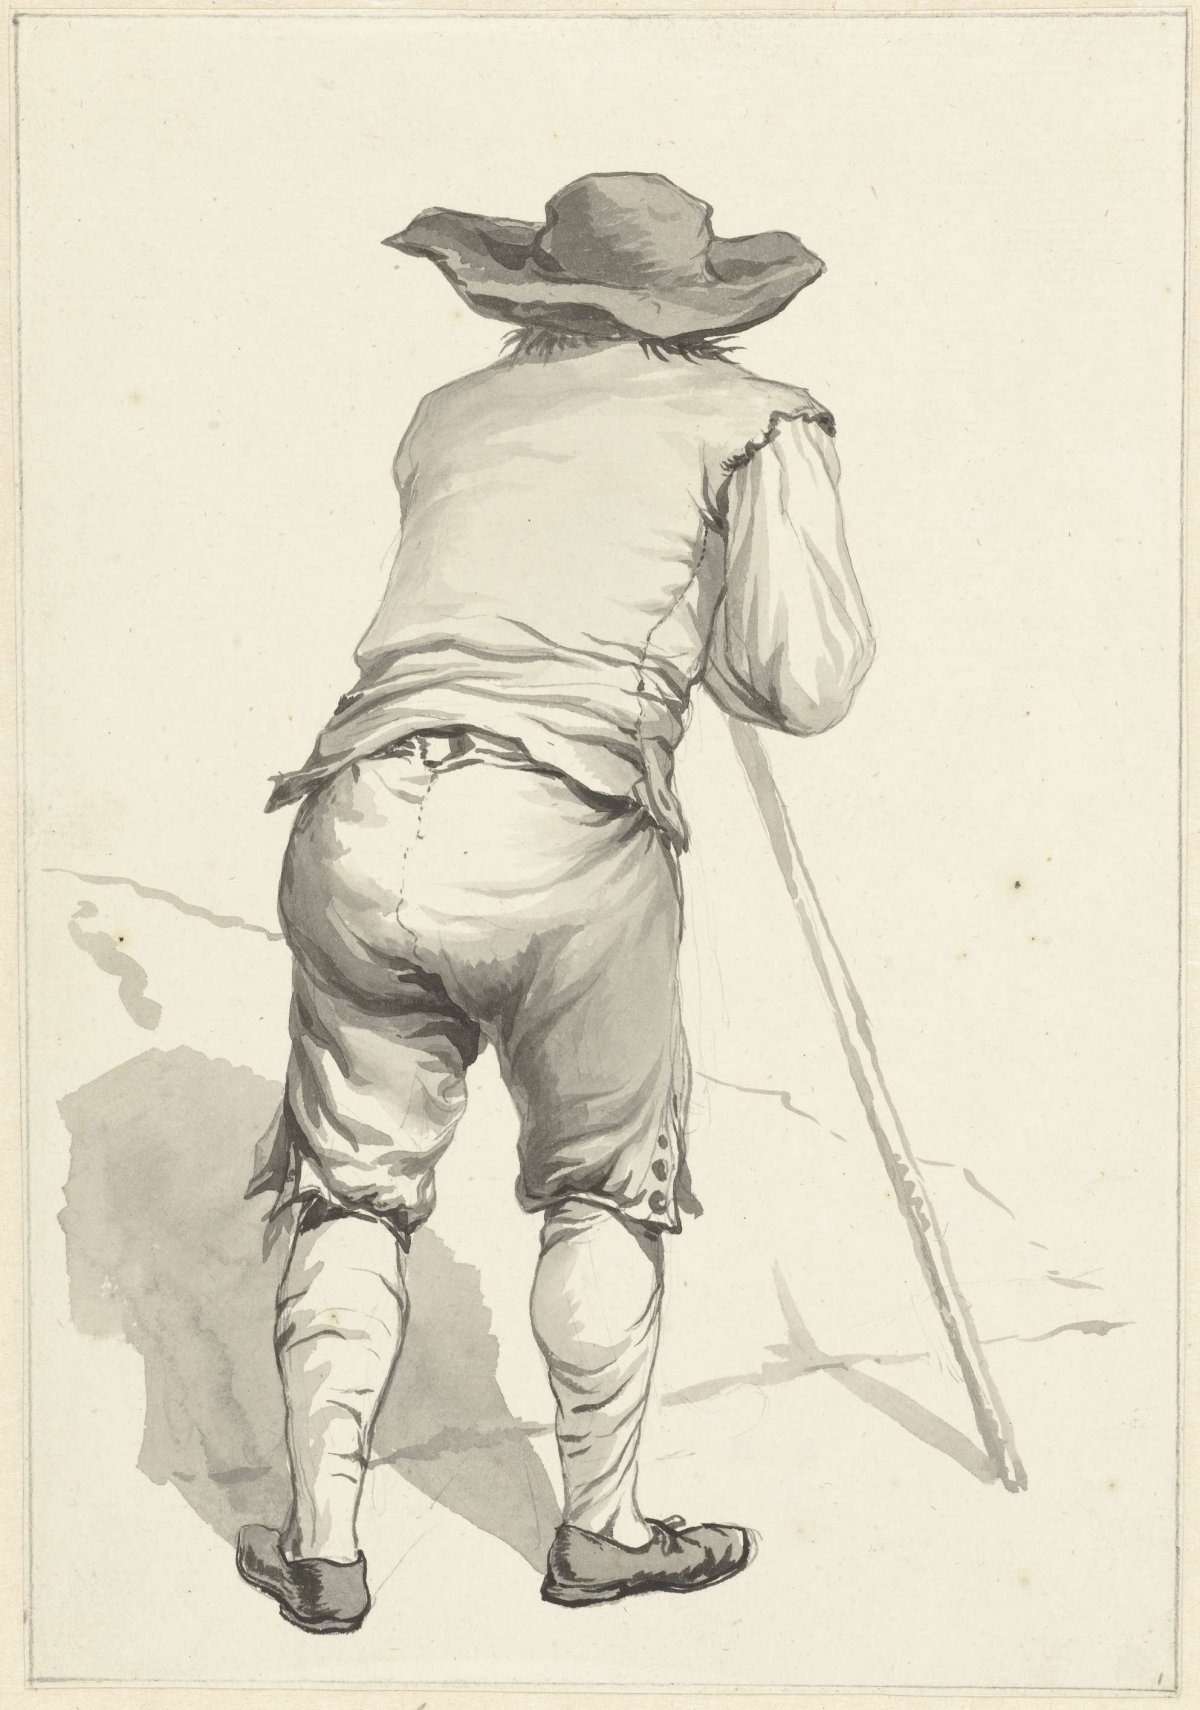 Man leaning forward on a stick, seen from behind, Abraham van Strij (I), 1763 - 1826